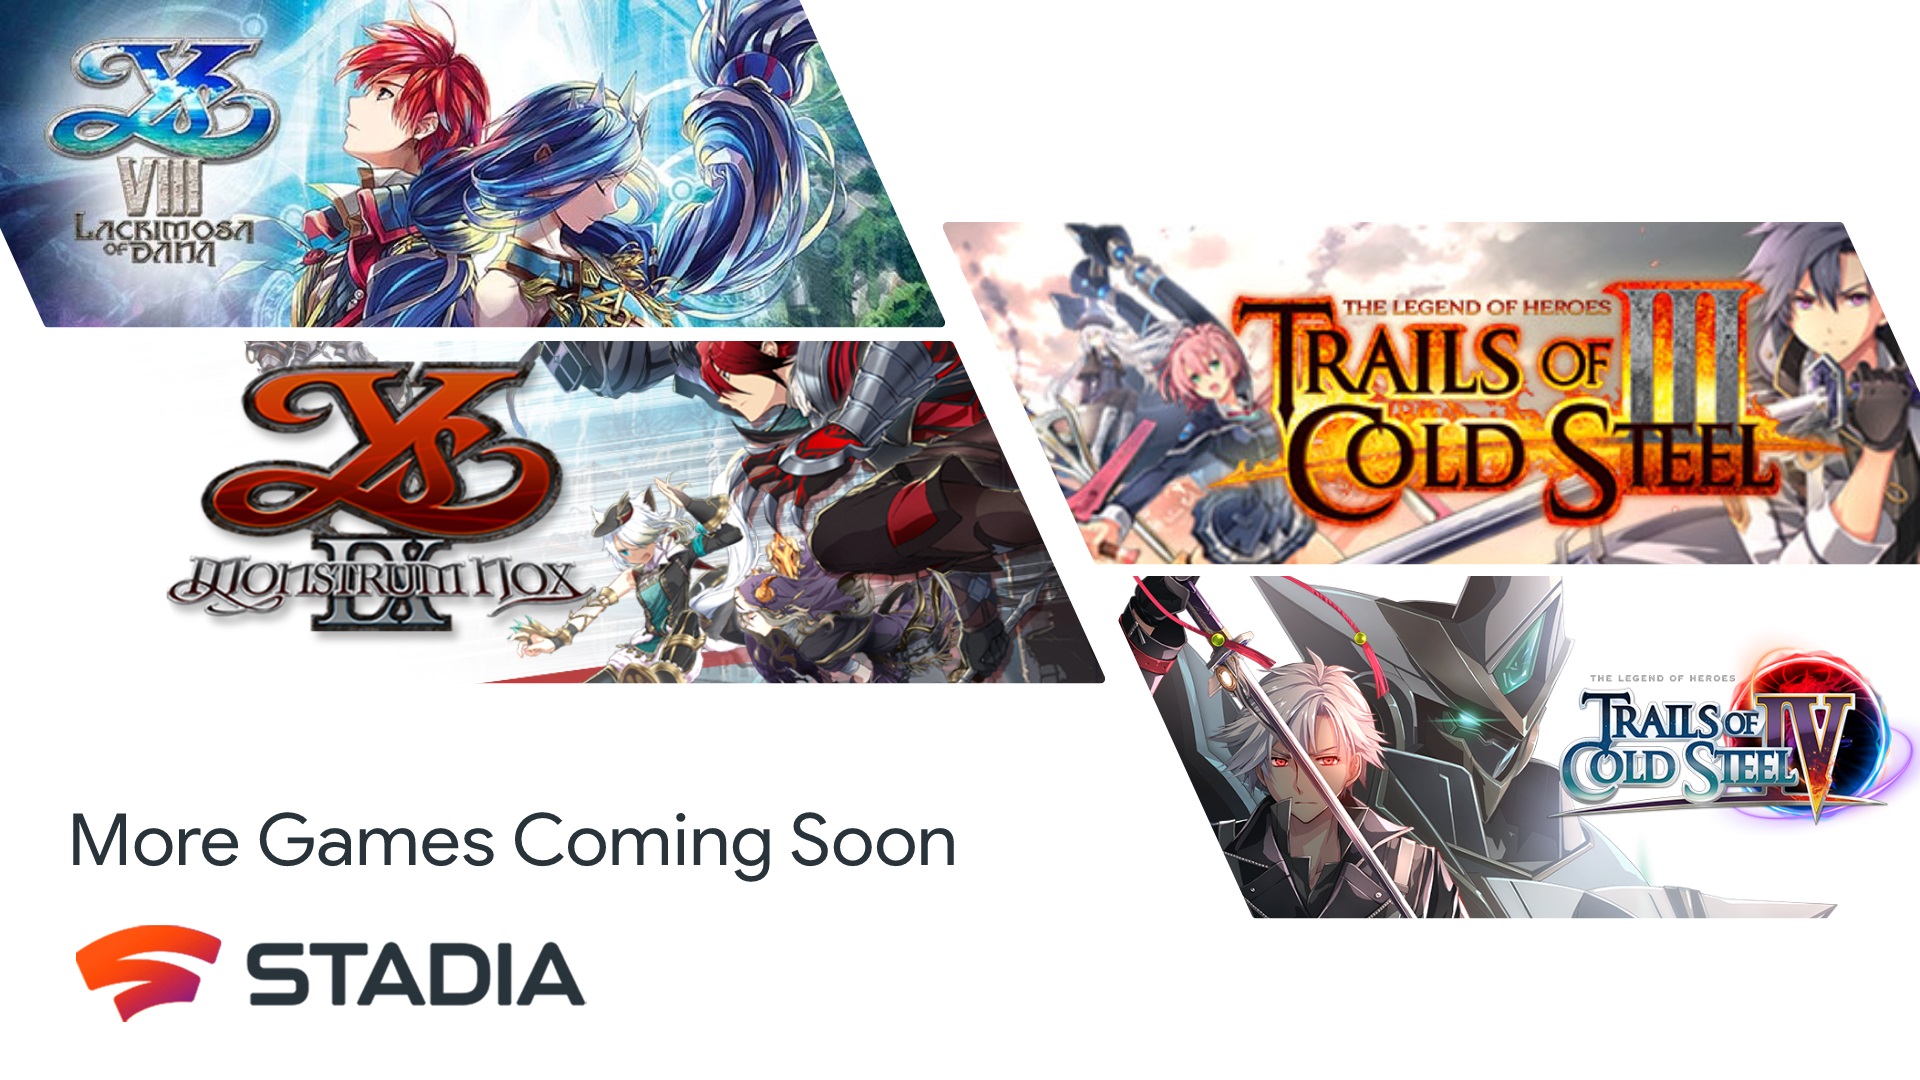 Ys VIII Ys IX The Legend of Heroes: Trails of Cold Steel III and IV Stadia